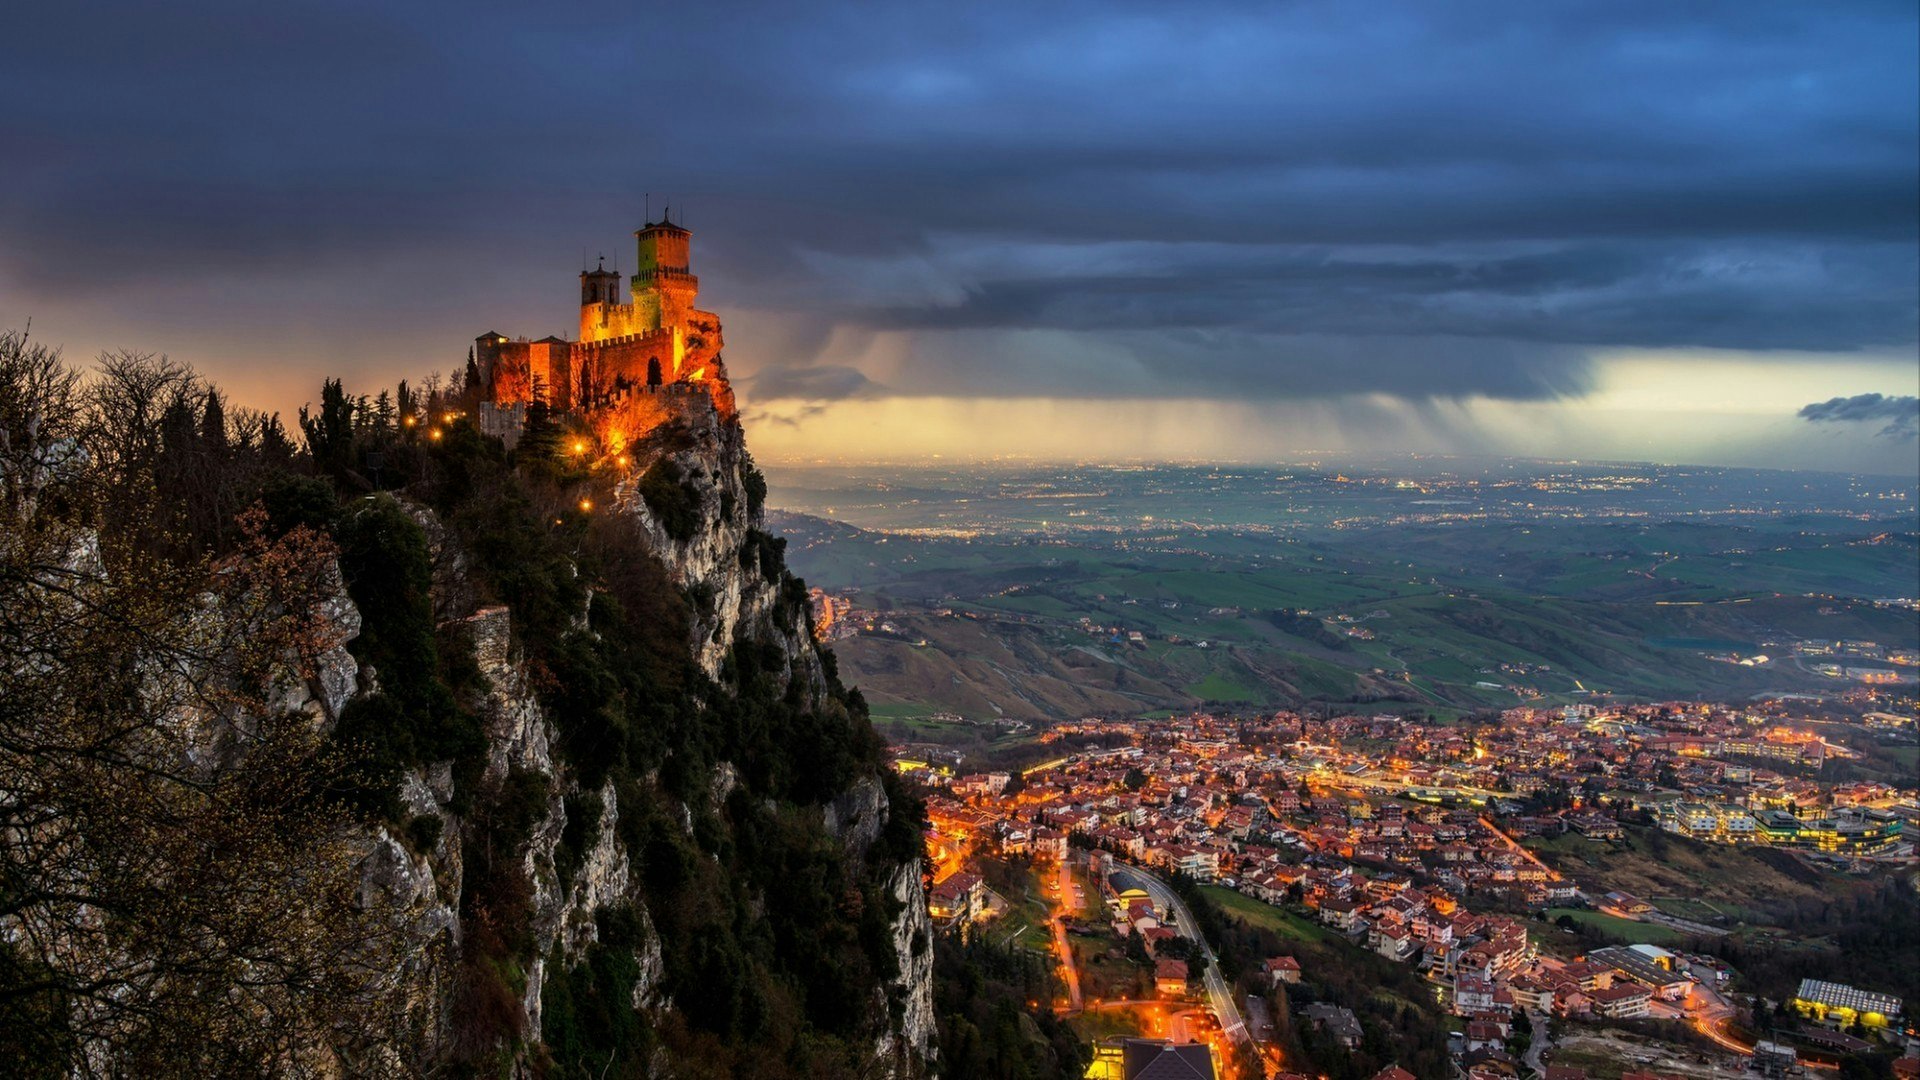 San Marino fortress of Guaita on Mount Titano at sunset. Heavy raining clouds with aerial view at the city